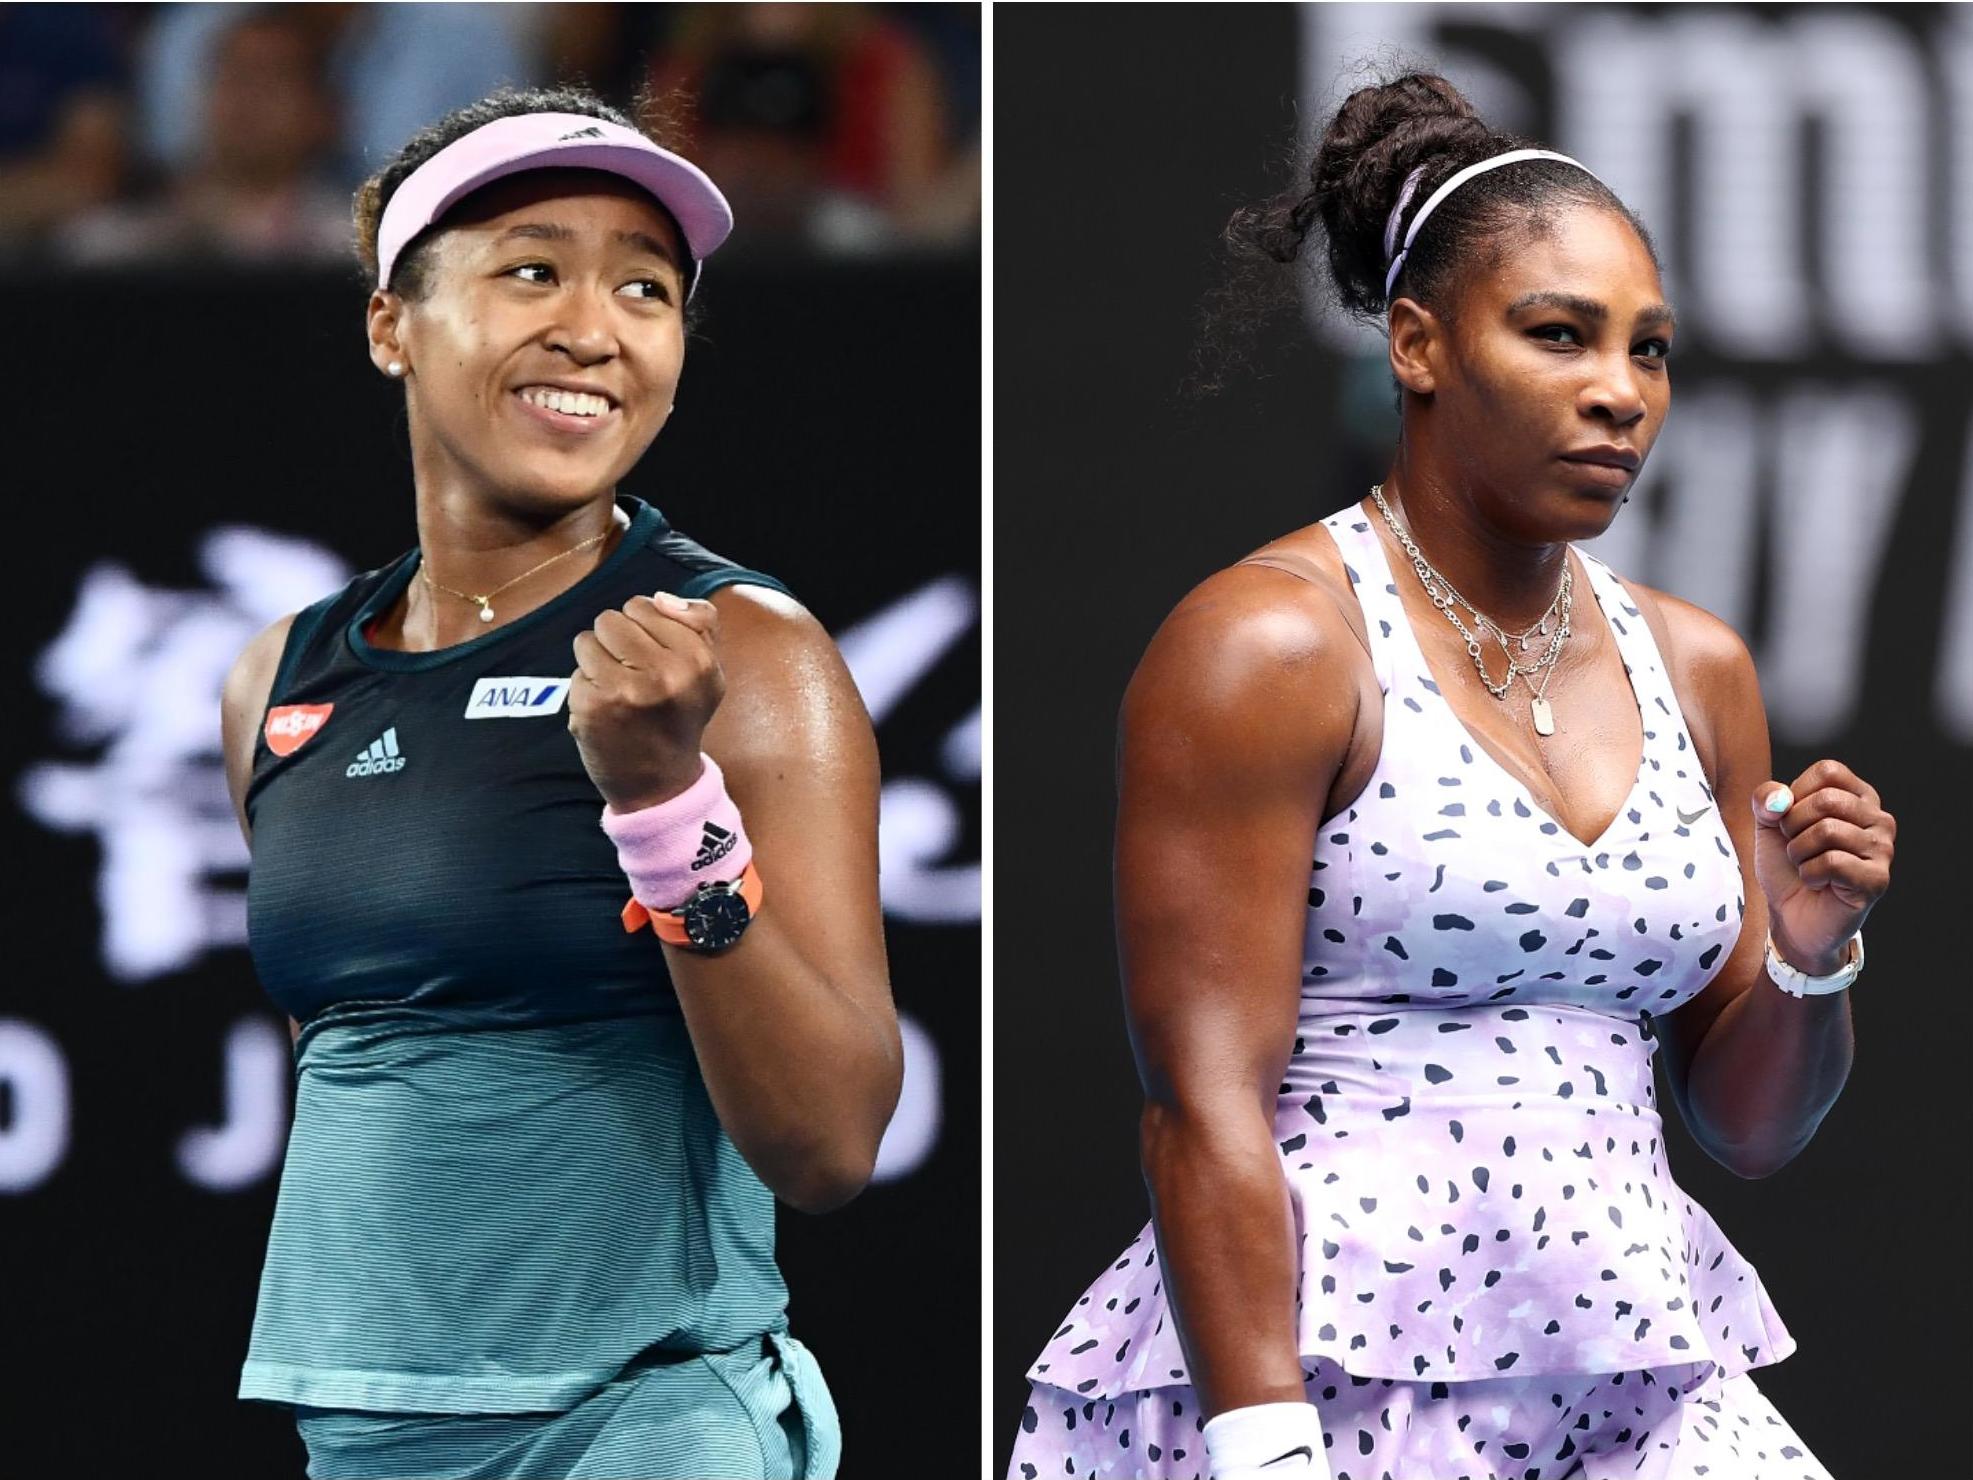 Osaka has overtaken Williams to become the highest-paid female athlete